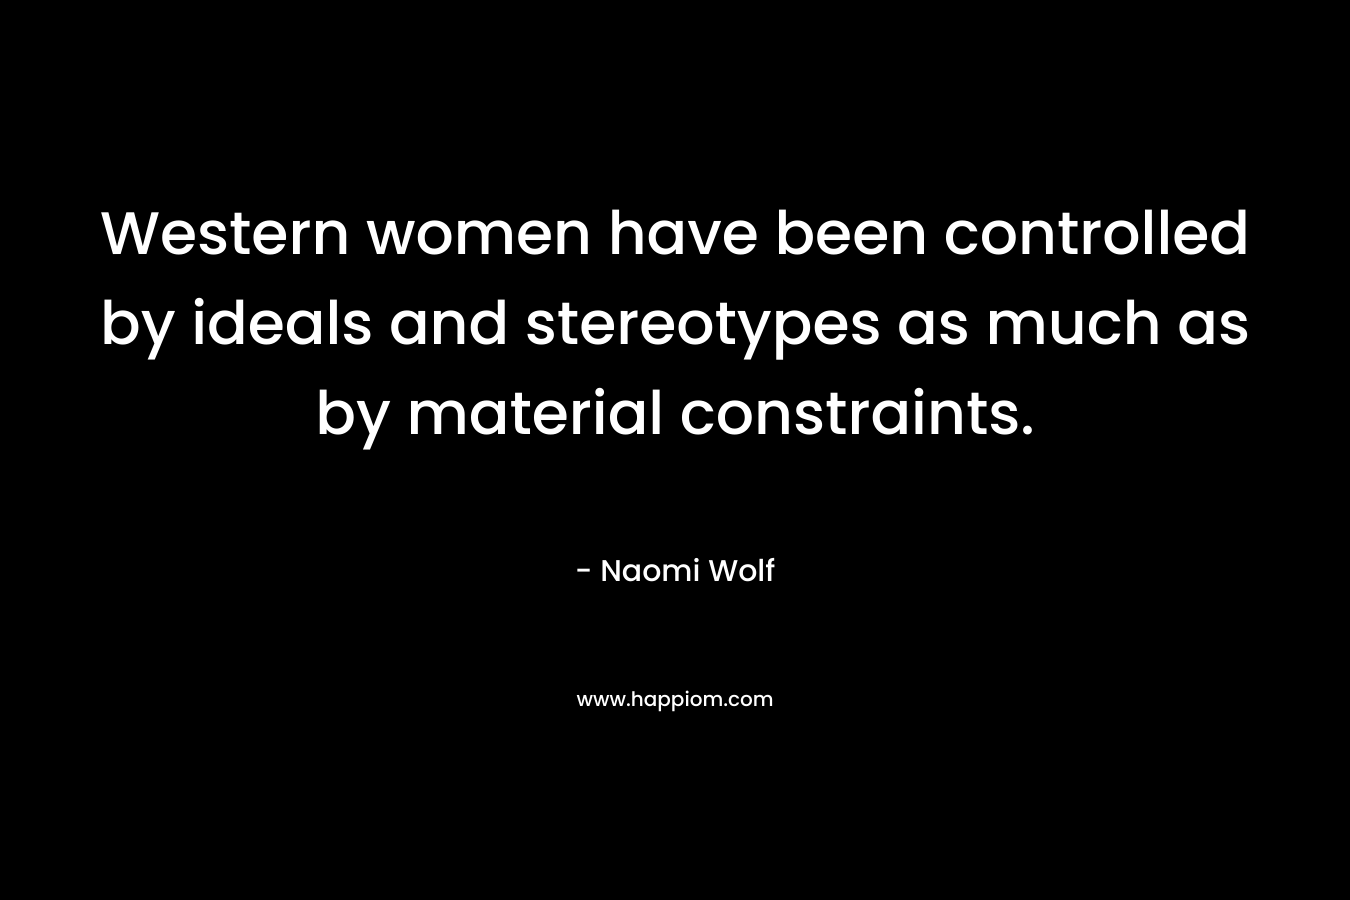 Western women have been controlled by ideals and stereotypes as much as by material constraints. – Naomi Wolf